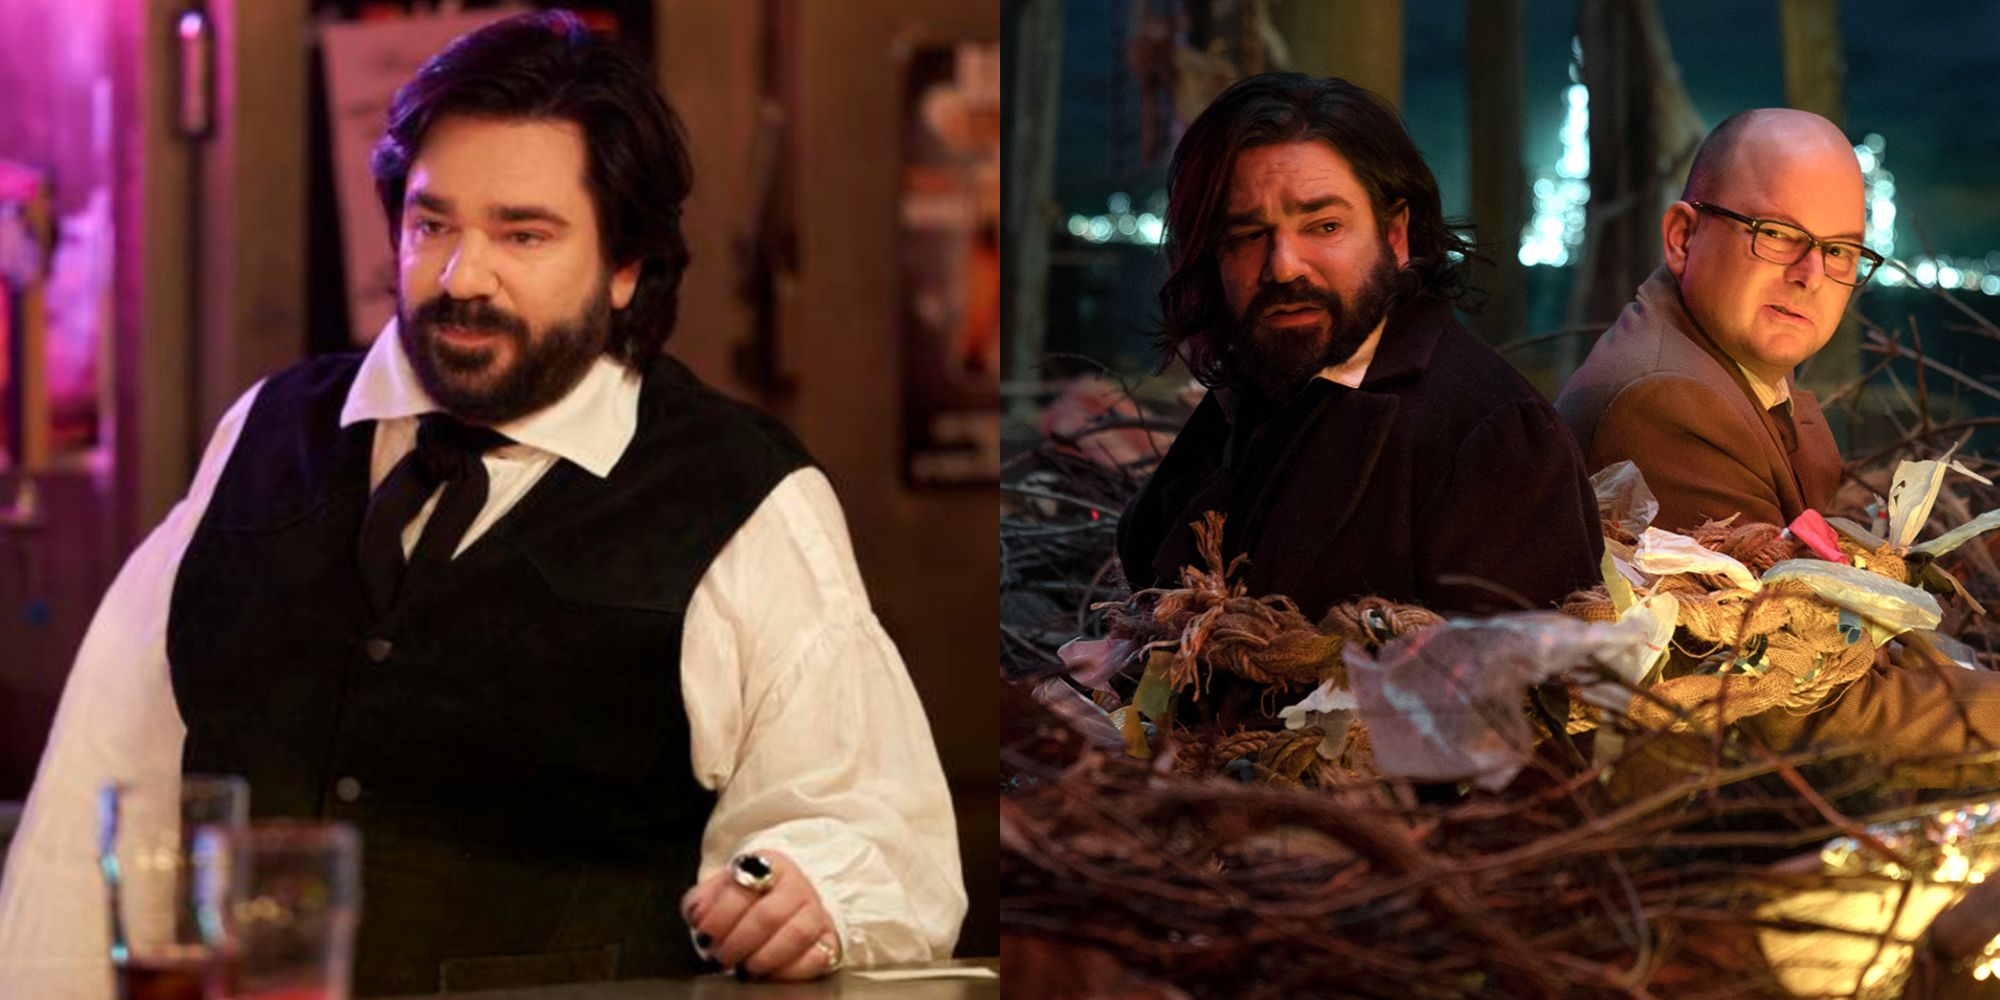 A split image showing Laszlo in What We Do in the Shadows